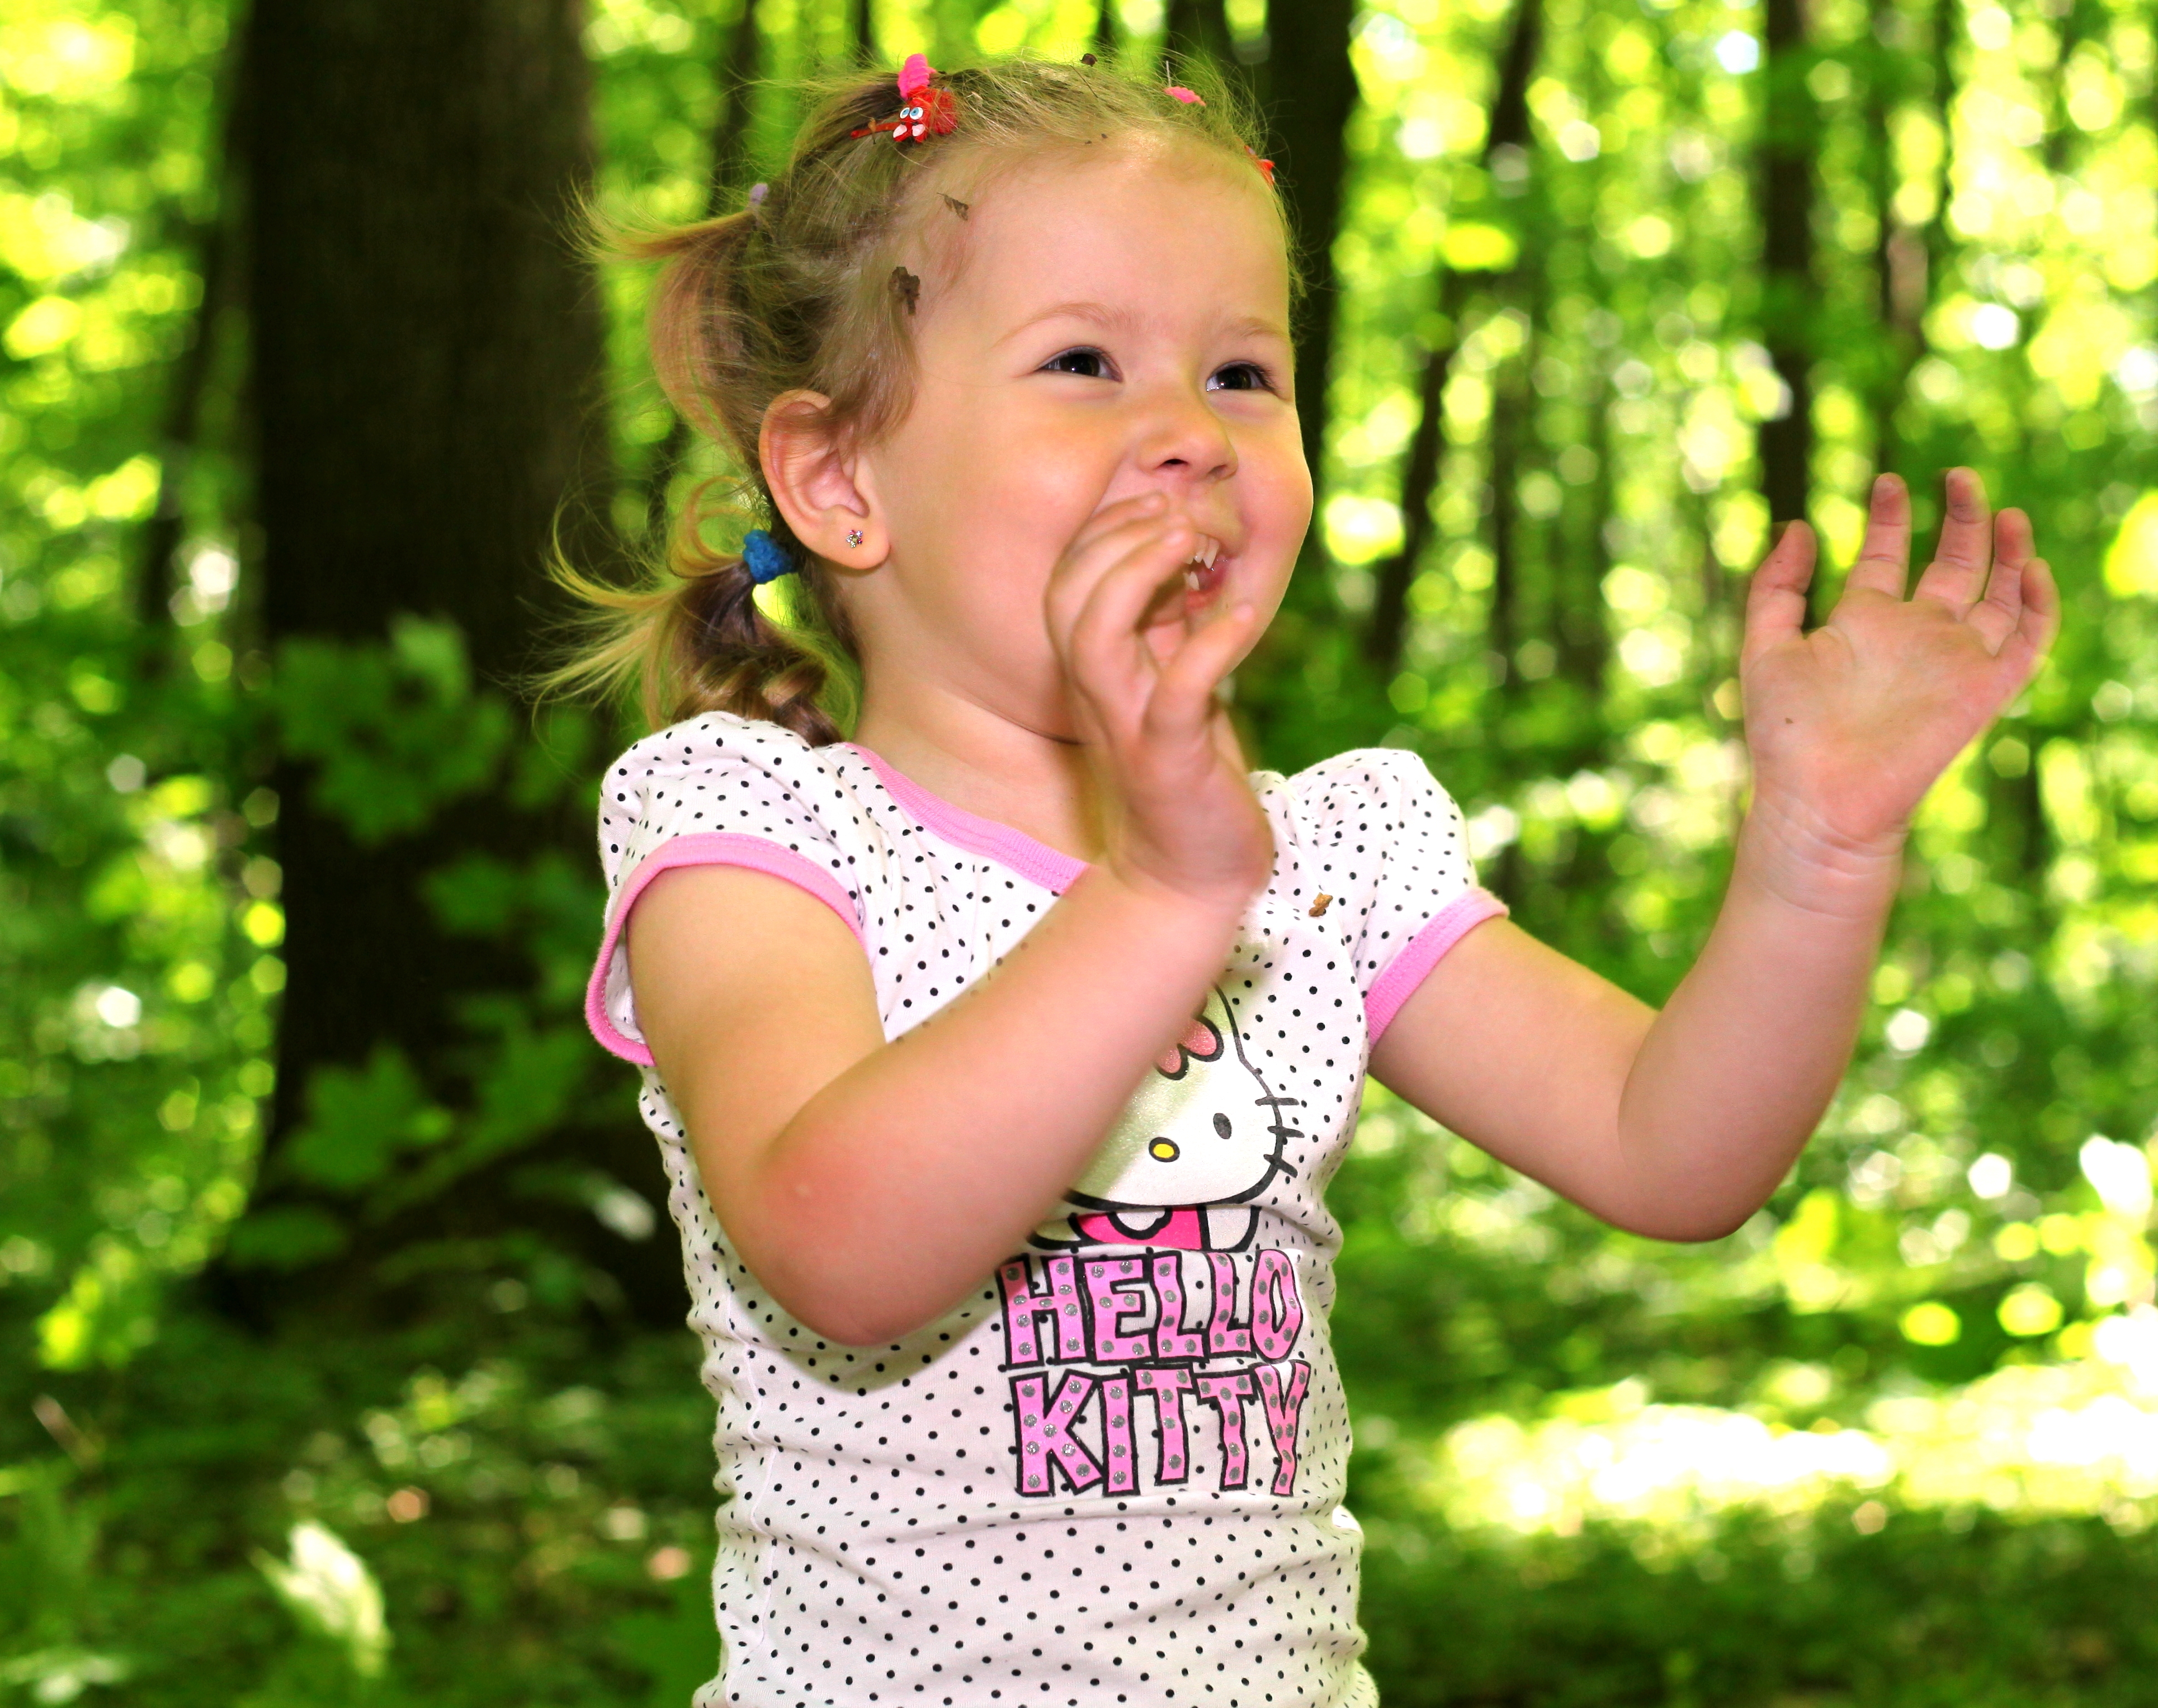 a cute Catholic kid girl in a forest photographed in May 2013, image 2/2